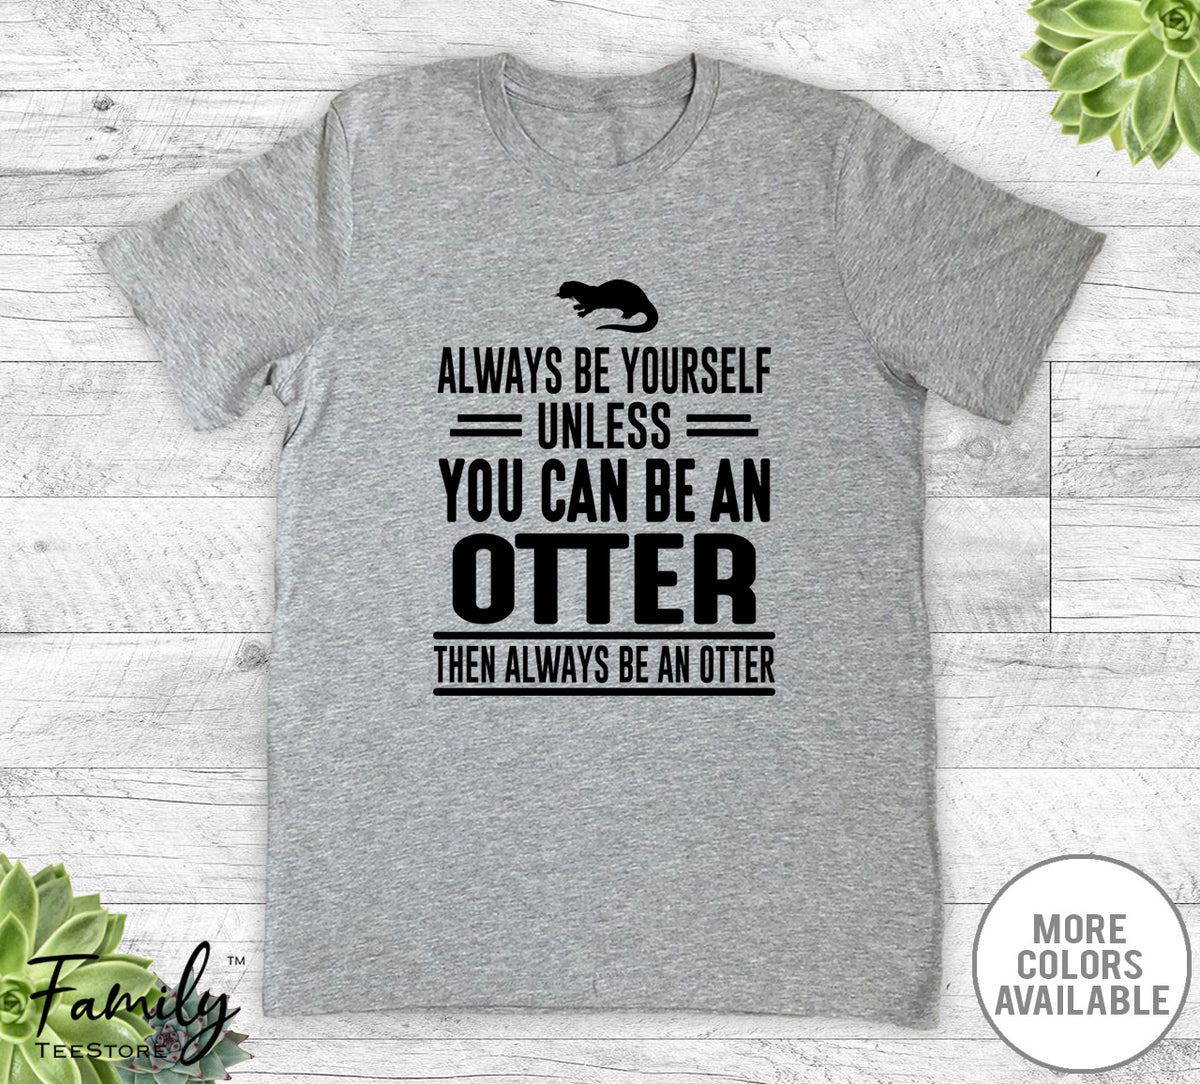 Always Be Yourself Unless You Can Be An Otter - Unisex T-shirt - Otter Shirt - Otter Gift - familyteeprints